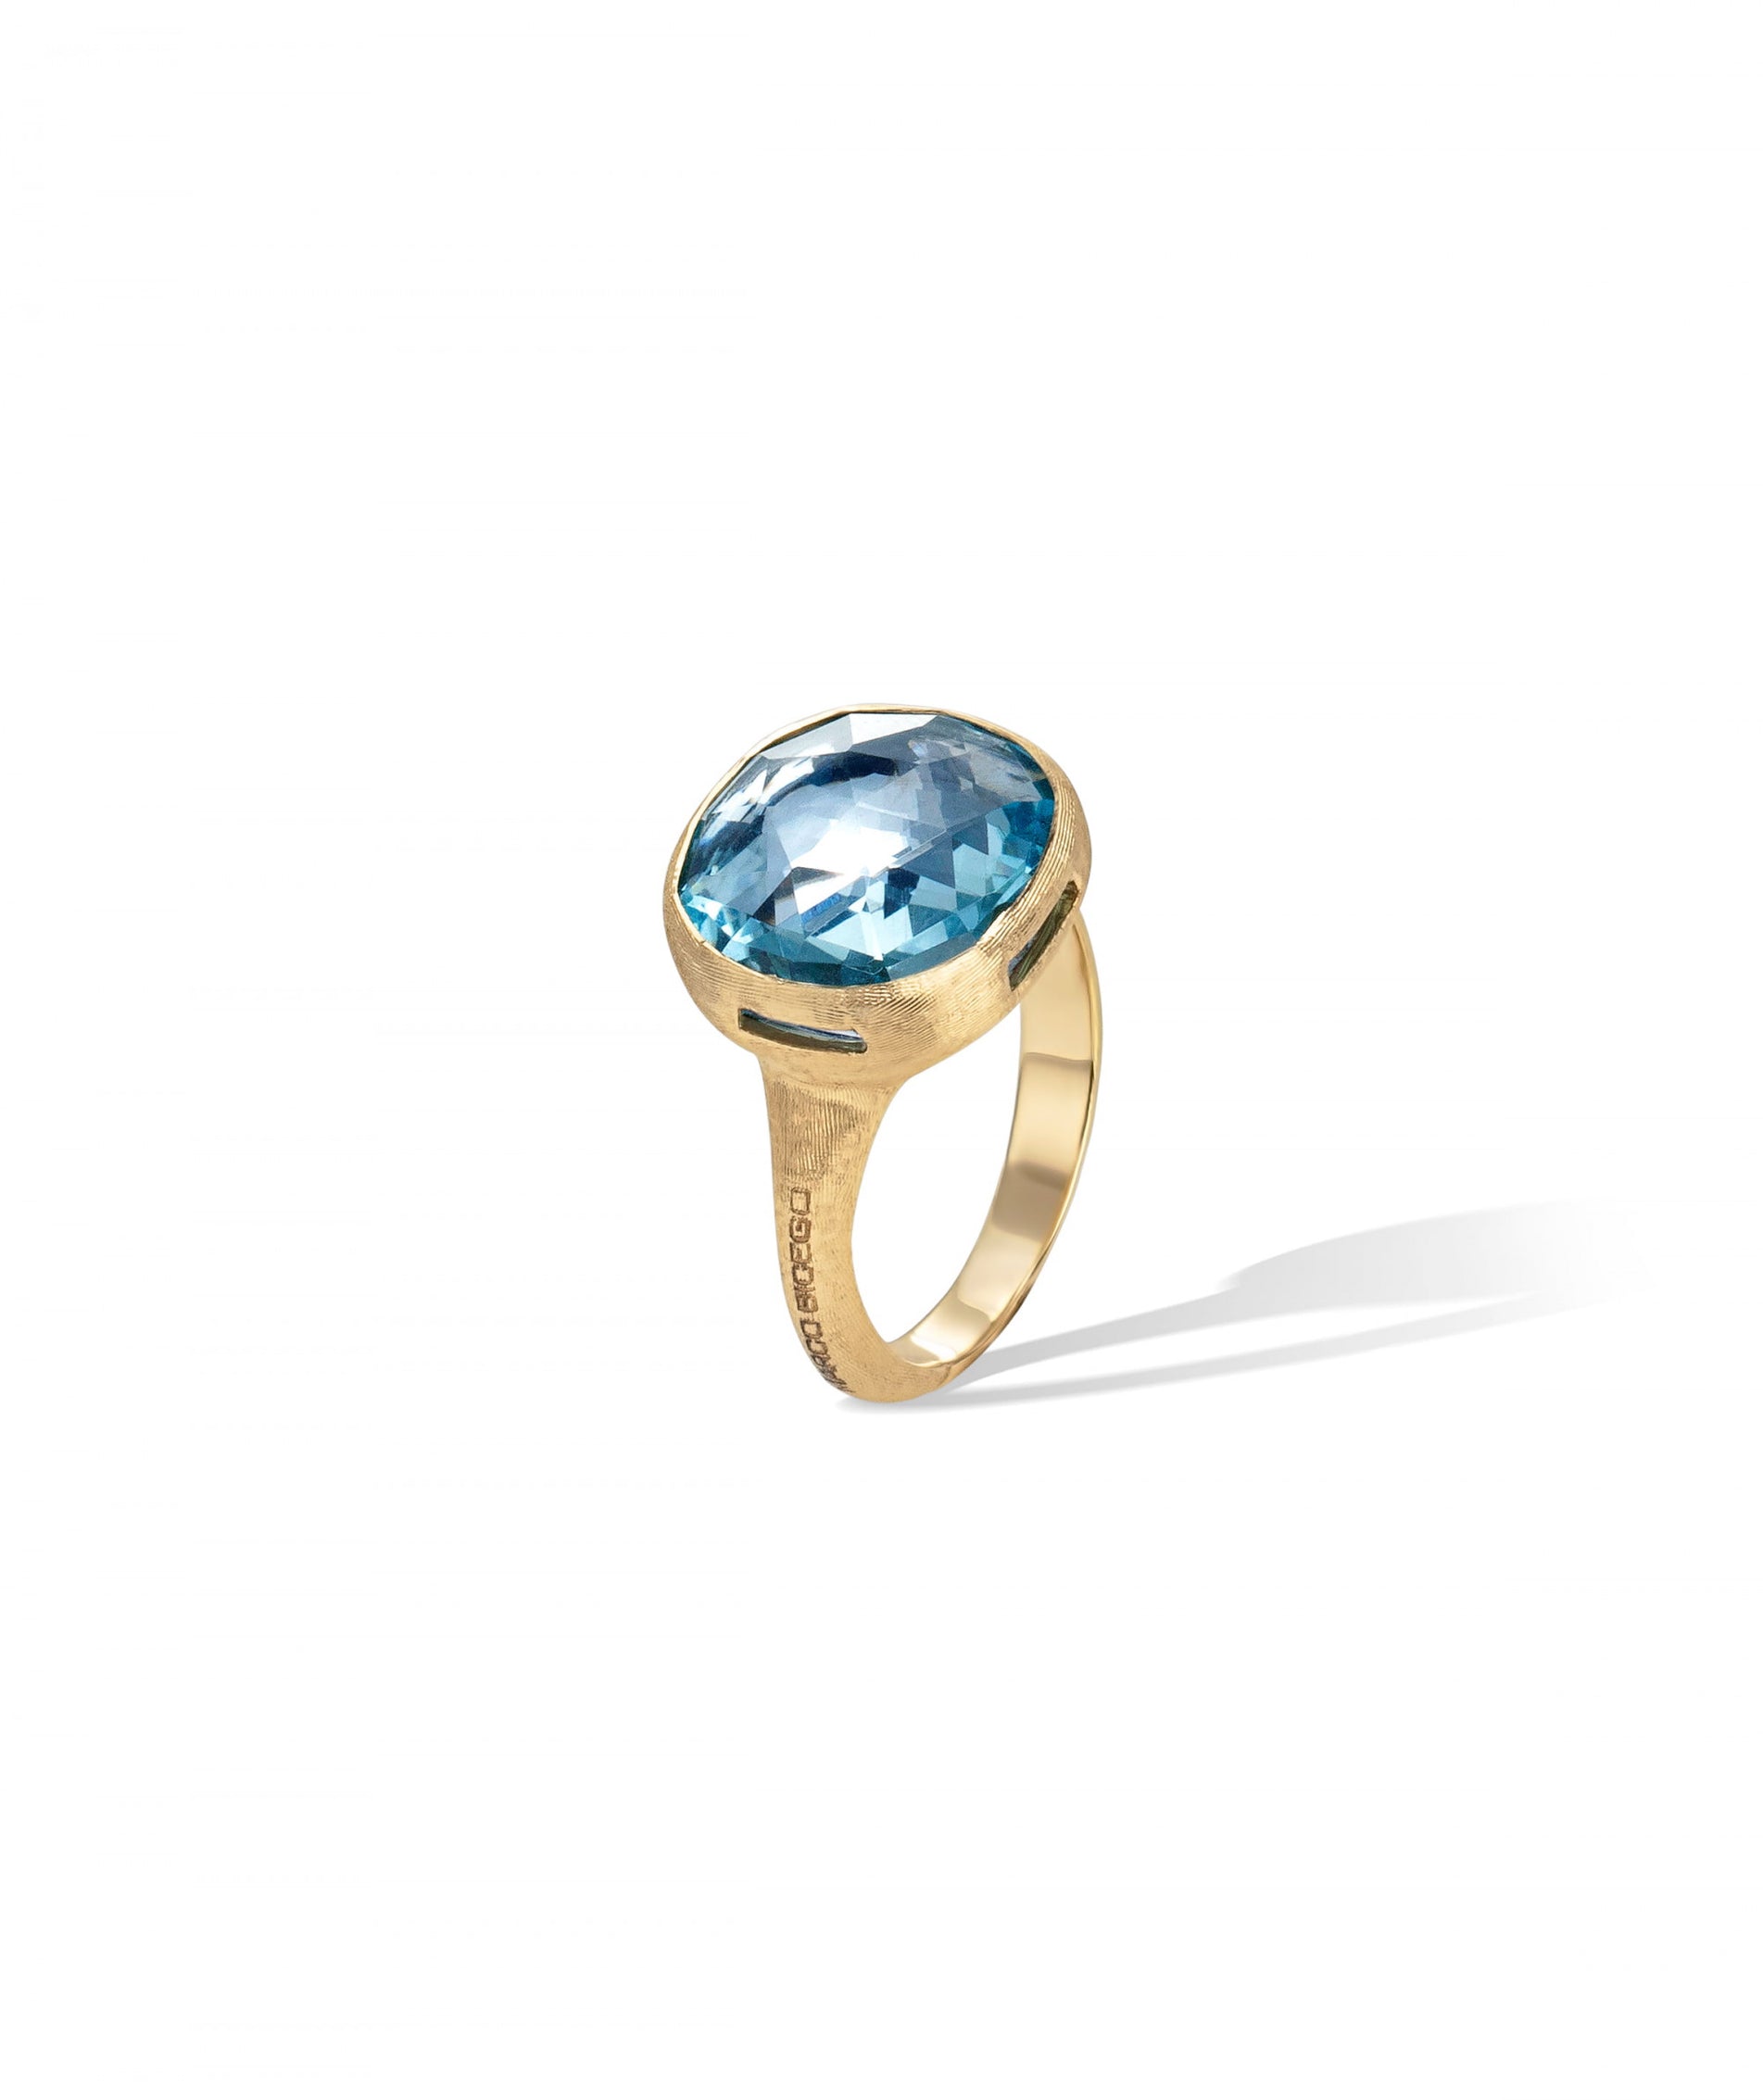 Jaipur Colour Ring in 18k Yellow Gold with Sky Blue Topaz Large - Orsini Jewellers NZ